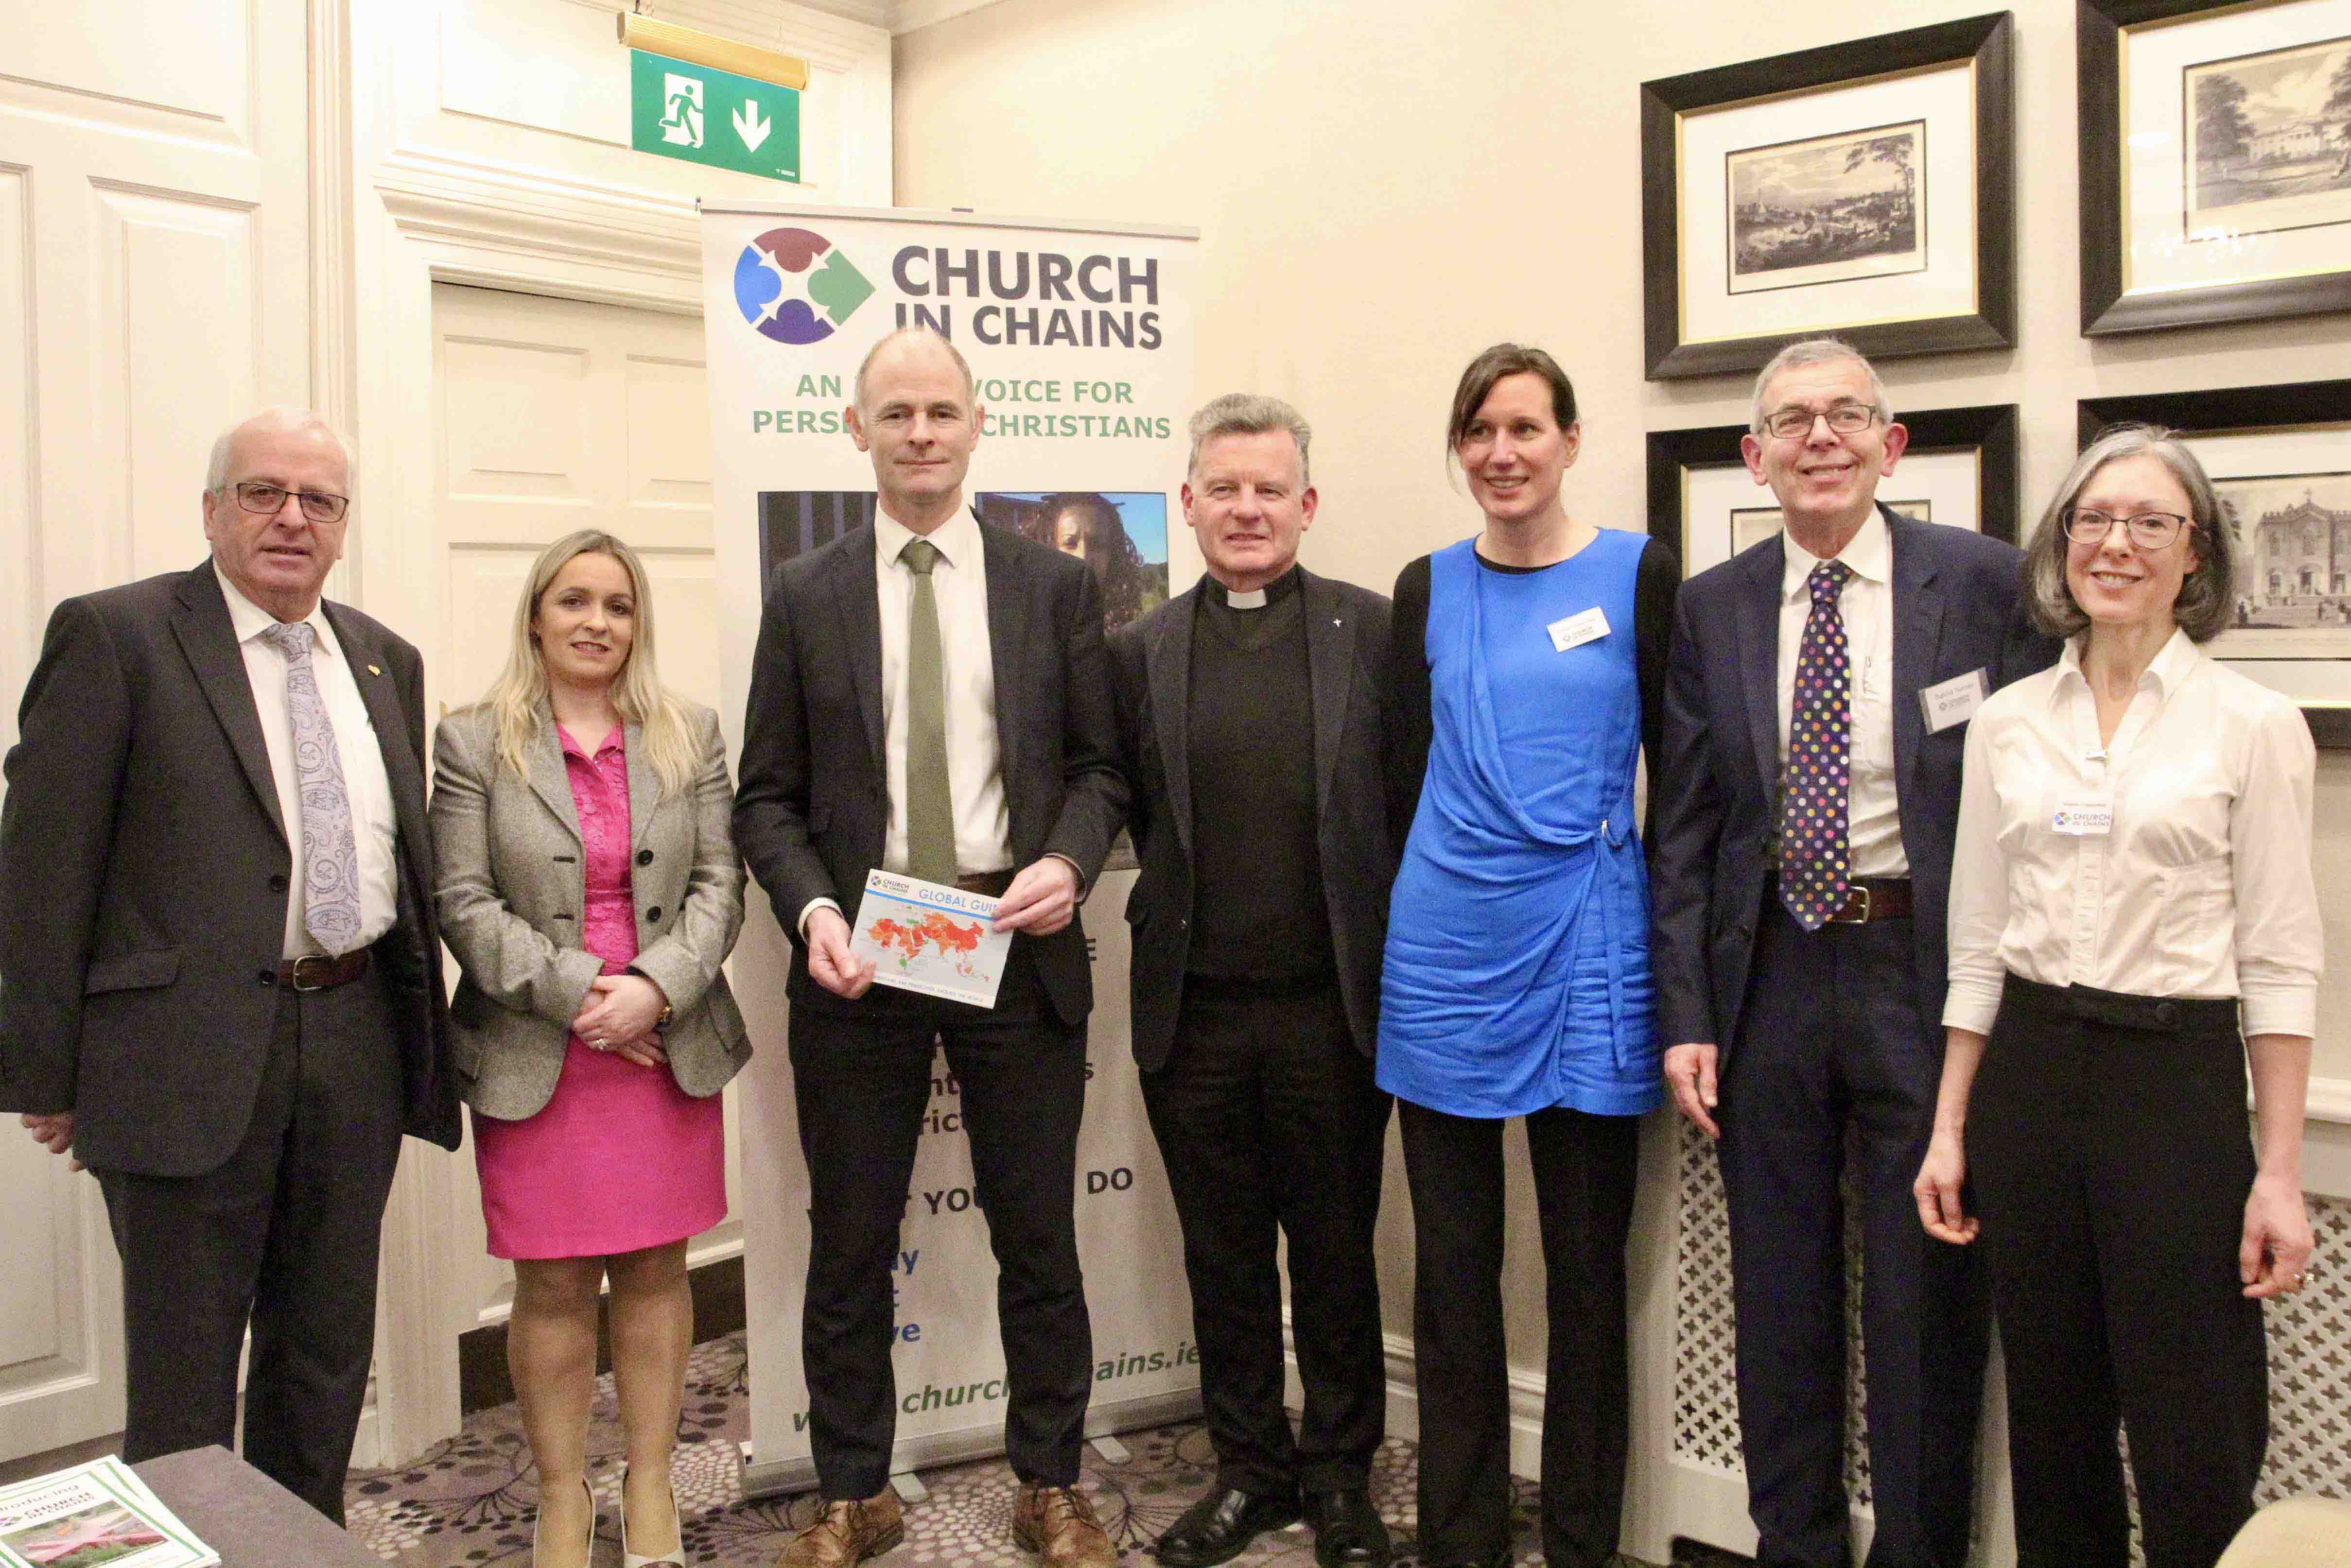 Deputy Mattie McGrath, Deputy Carol Nolan, Minister Ossian Smyth, the Revd Trevor Sargent and Church in Chains staff Susanne Chipperfield, David Turner and Virginia Chipperfield at the launch of the Global Guide.